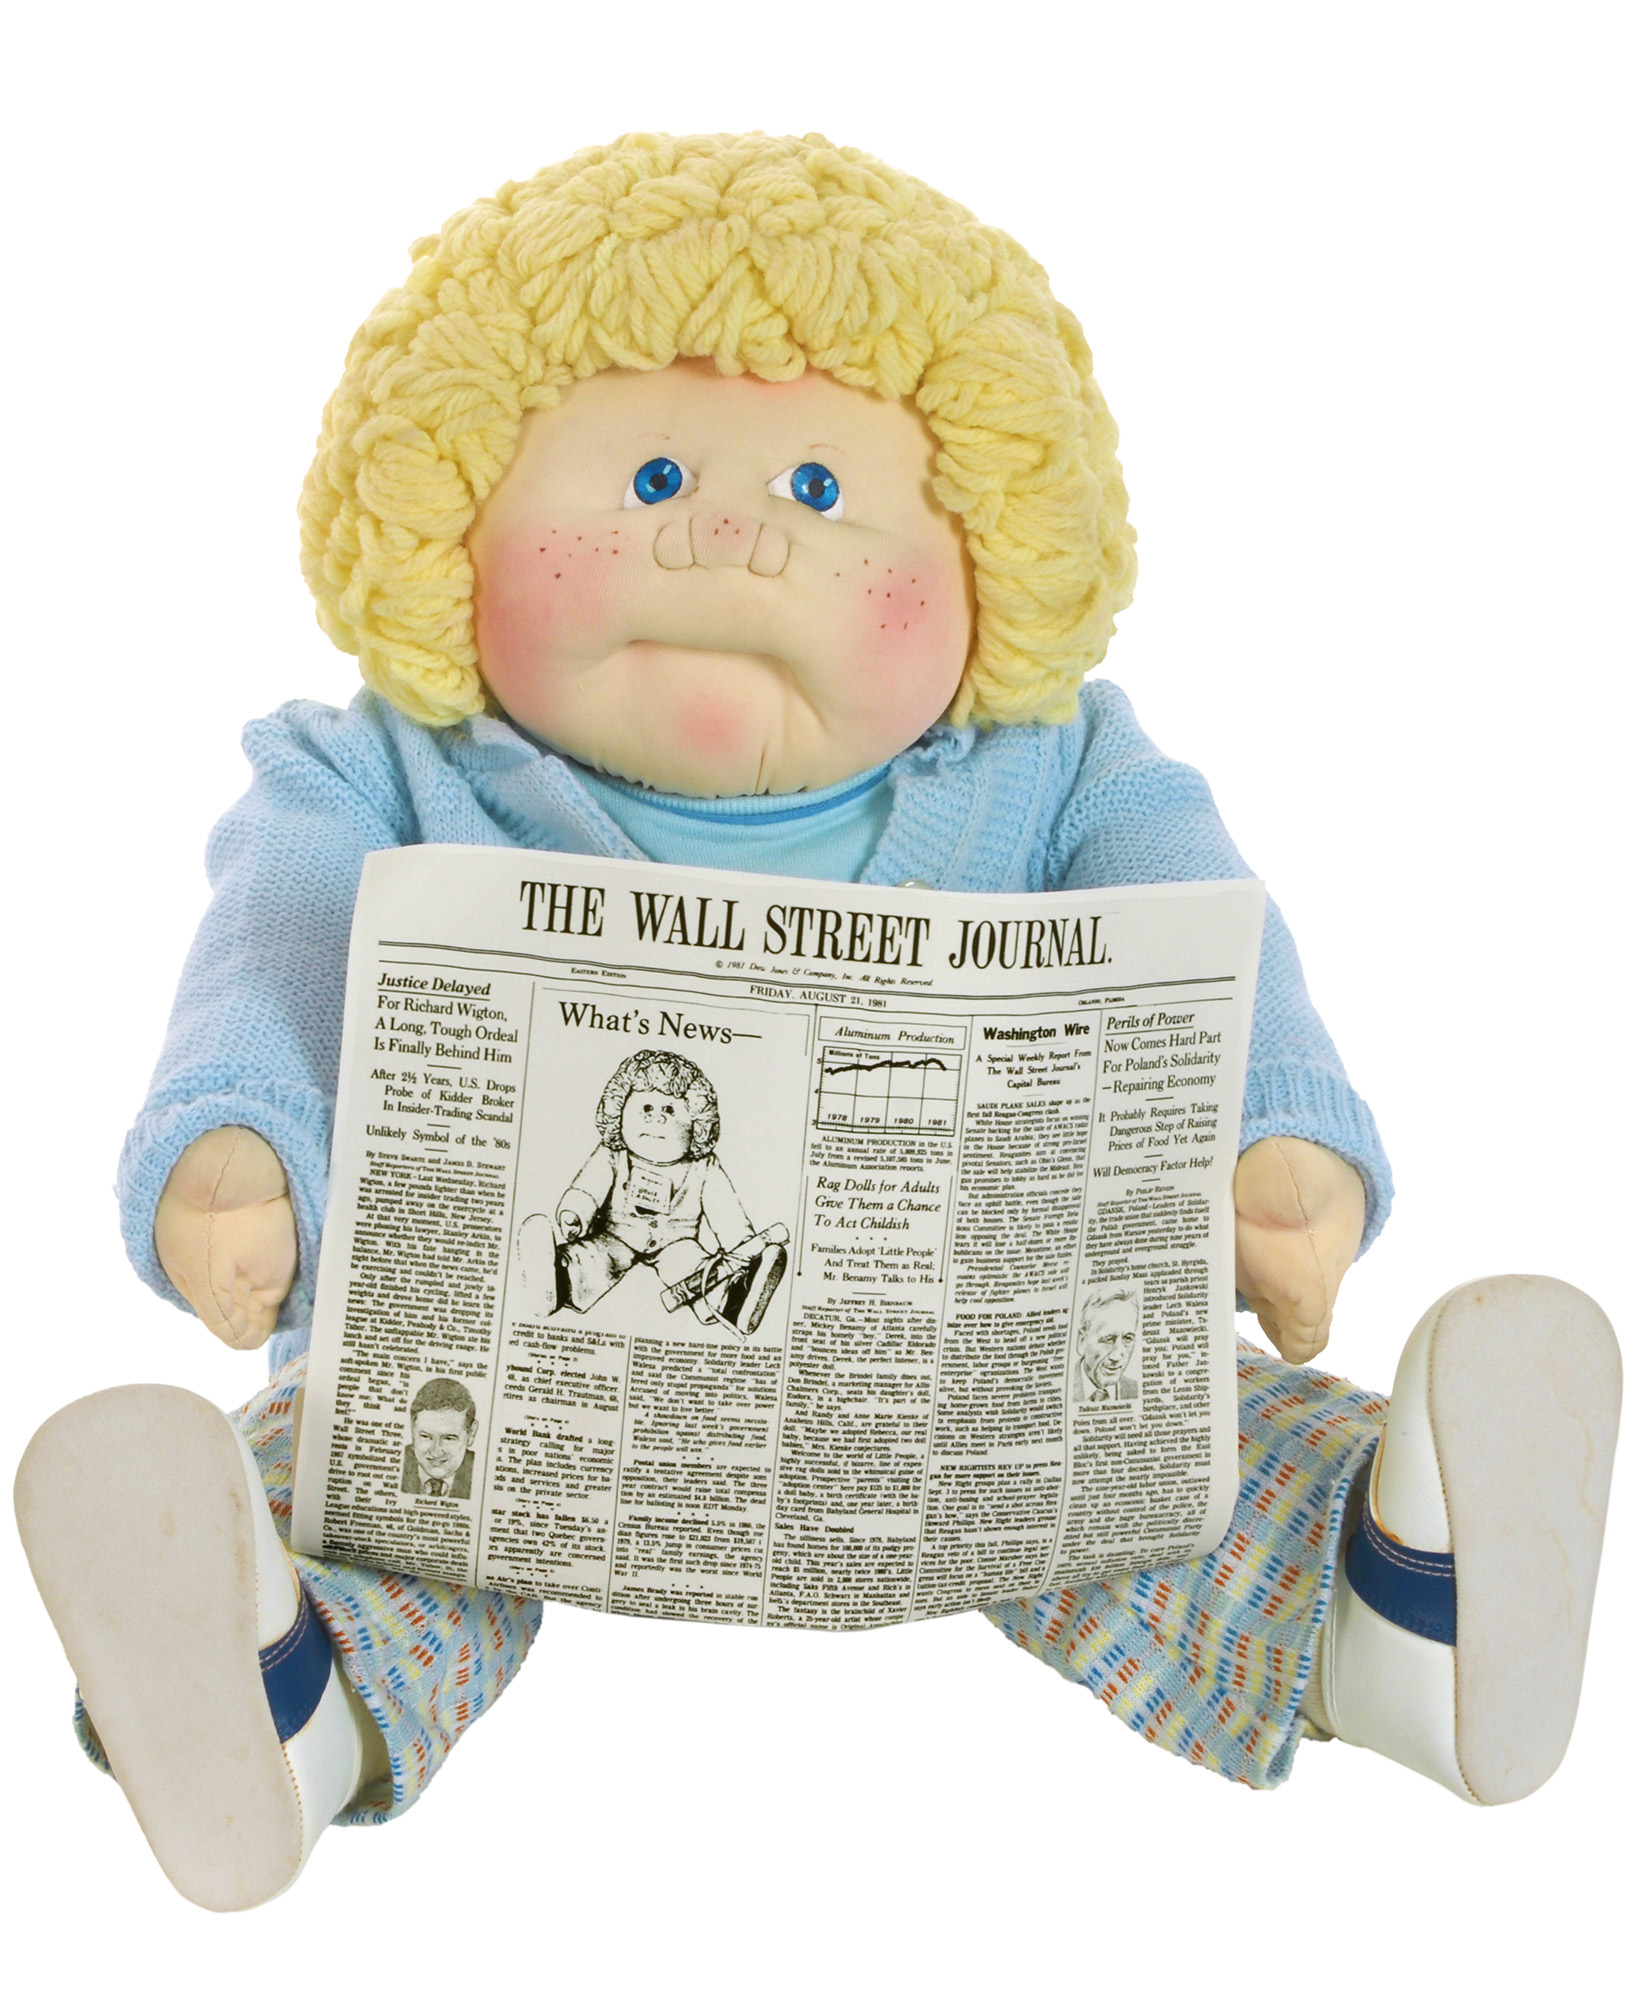 my first cabbage patch baby doll